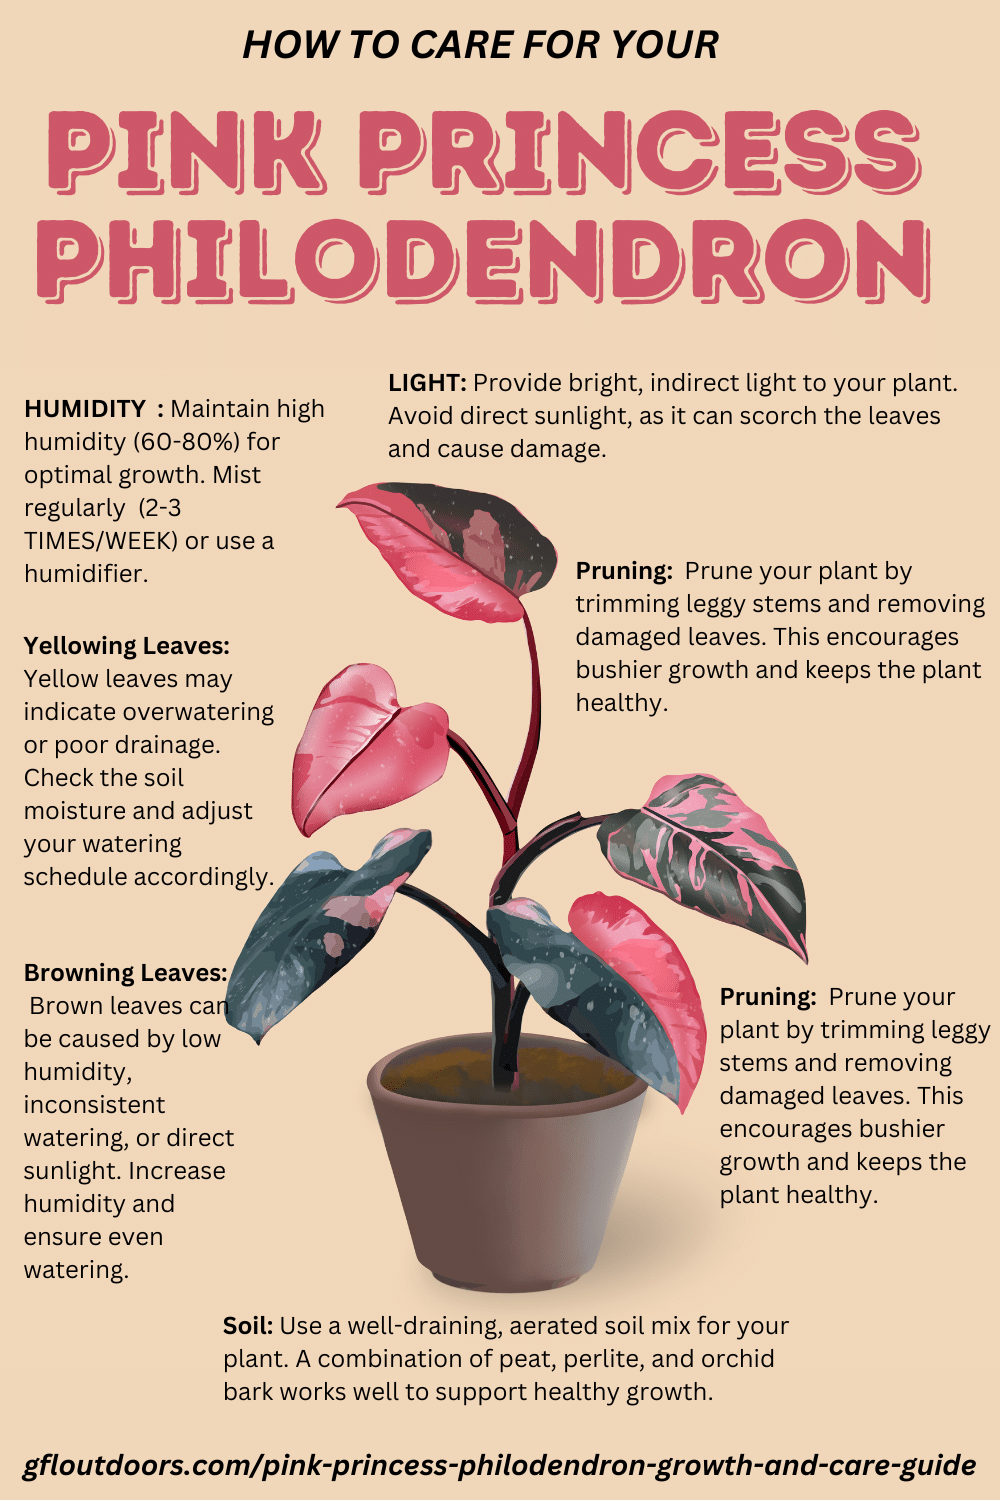 TEXT BASED INFOGRAPHIC: Pink Princess Philodendron HOW TO CARE FOR YOUR HUMIDITY : Maintain high humidity (60-80%) for optimal growth. Mist regularly (2-3 TIMES/WEEK) or use a humidifier. LIGHT: Provide bright, indirect light to your plant. Avoid direct sunlight, as it can scorch the leaves and cause damage. Pruning: Prune your plant by trimming leggy stems and removing damaged leaves. This encourages bushier growth and keeps the plant healthy. Yellowing Leaves: Yellow leaves may indicate overwatering or poor drainage. Check the soil moisture and adjust your watering schedule accordingly. Browning Leaves: Brown leaves can be caused by low humidity, inconsistent watering, or direct sunlight. Increase humidity and ensure even watering. Pruning: Prune your plant by trimming leggy stems and removing damaged leaves. This encourages bushier growth and keeps the plant healthy. Soil: Use a well-draining, aerated soil mix for your plant. A combination of peat, perlite, and orchid bark works well to support healthy growth. gfloutdoors.com/pink-princess-philodendron-growth-and-care-guide